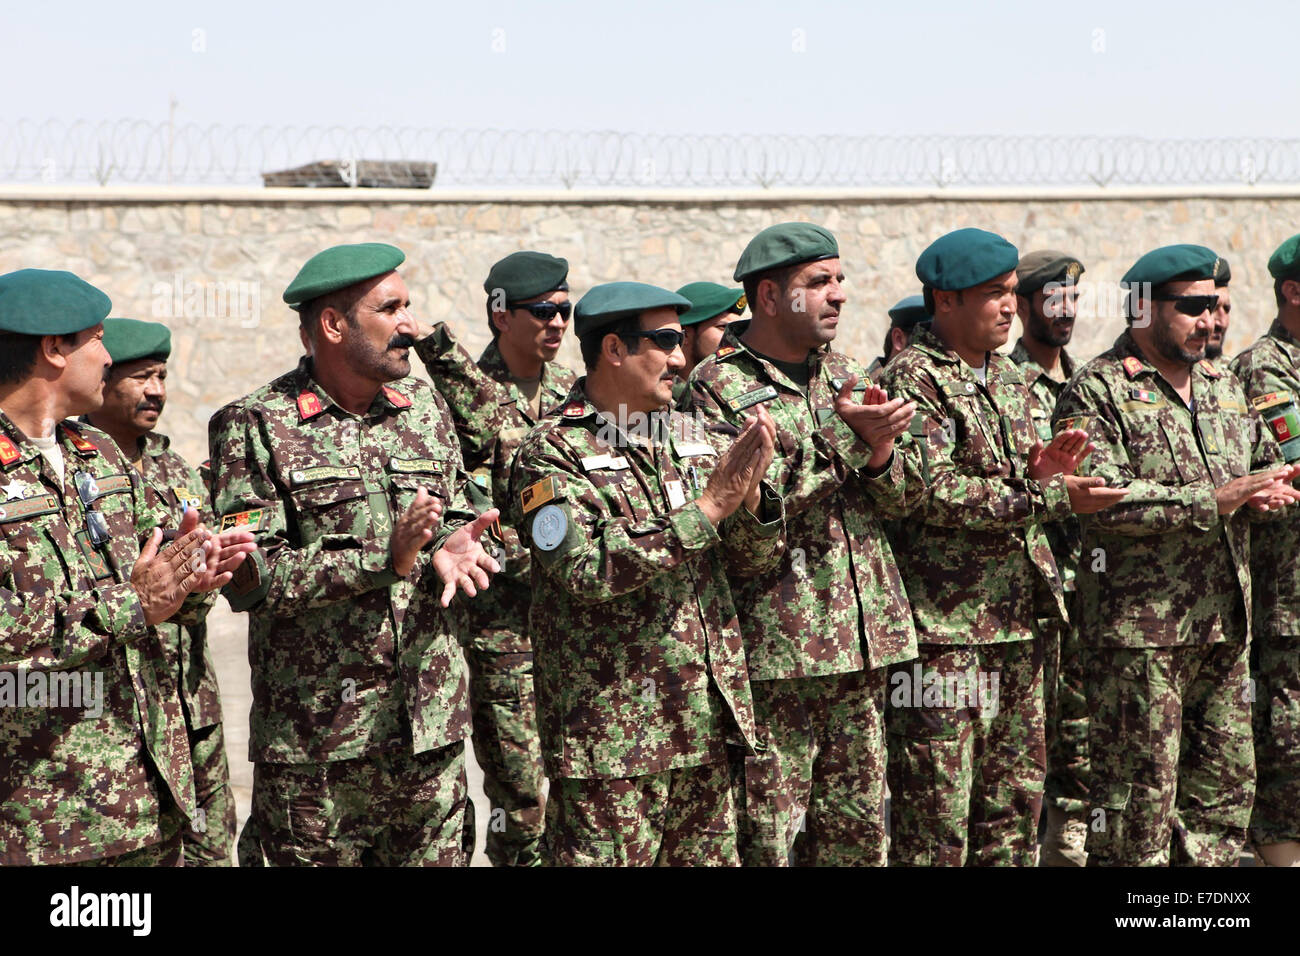 Afghan National Army soldiers with the 1st Brigade, 215th Corps, applaud at the ceremony for the newly constructed Camp Garm Ser September 1, 2014 in Garm Ser, Helmand province, Afghanistan. Stock Photo